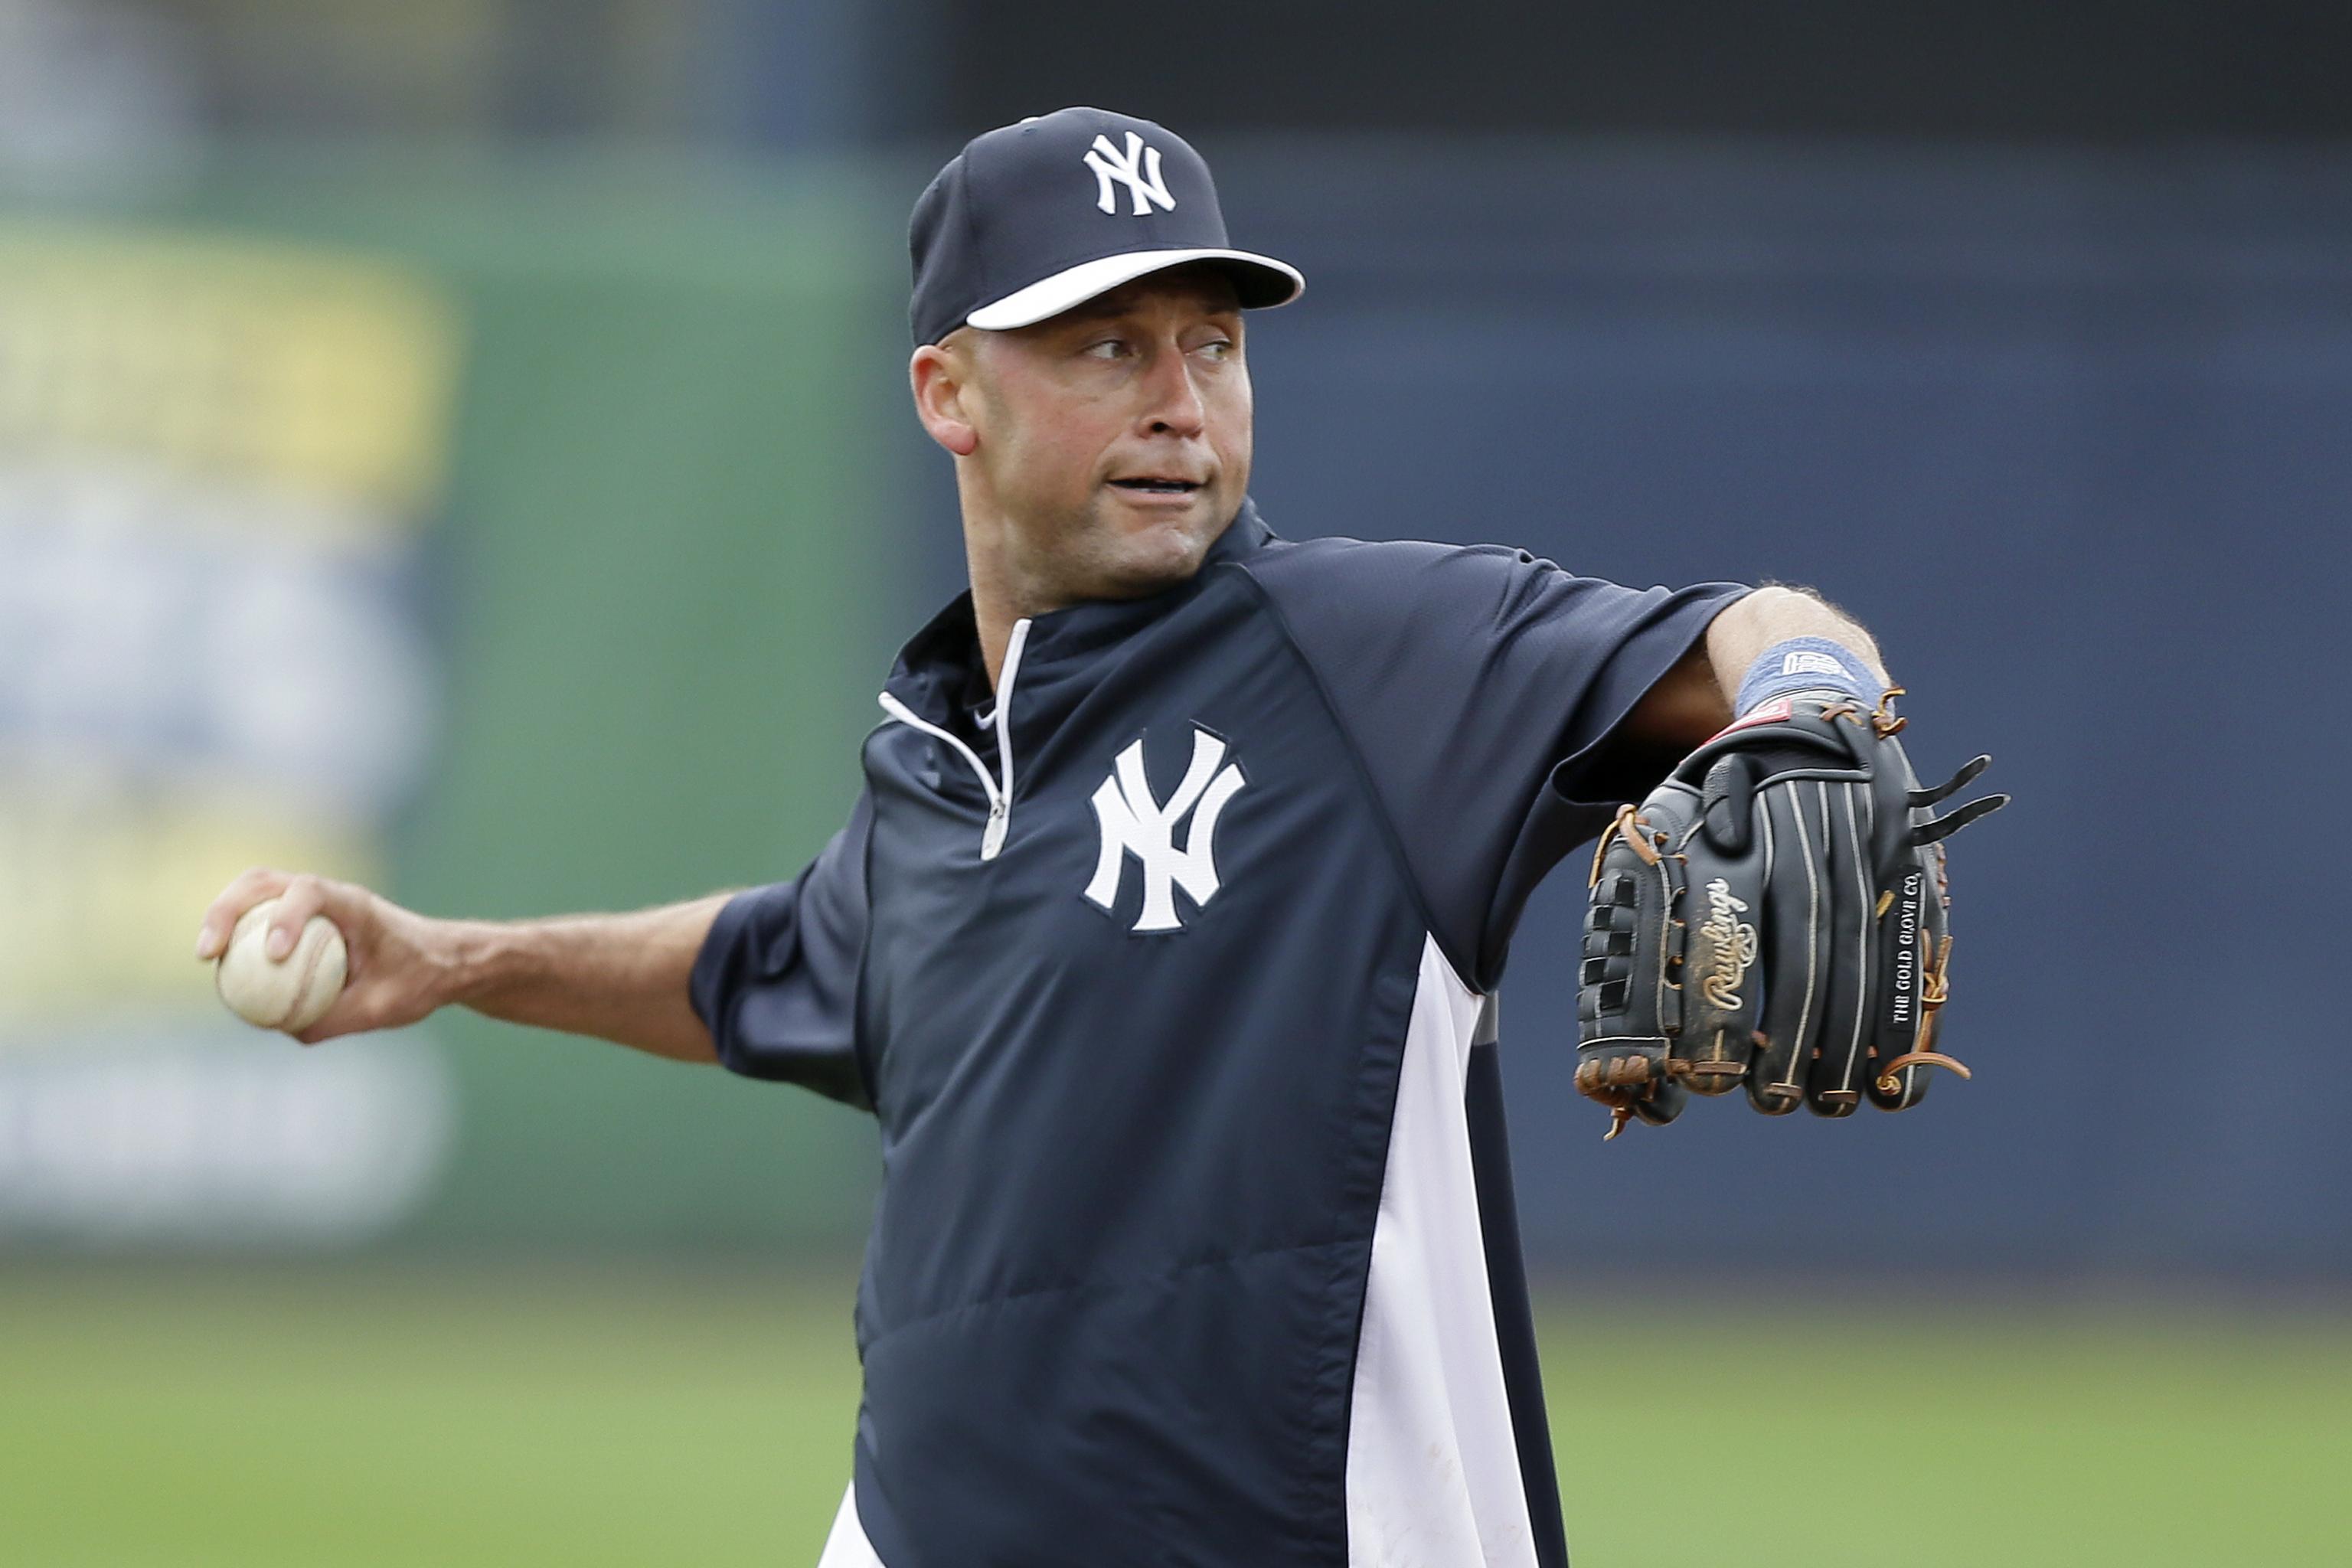 In first workout, Derek Jeter feels good after lost year